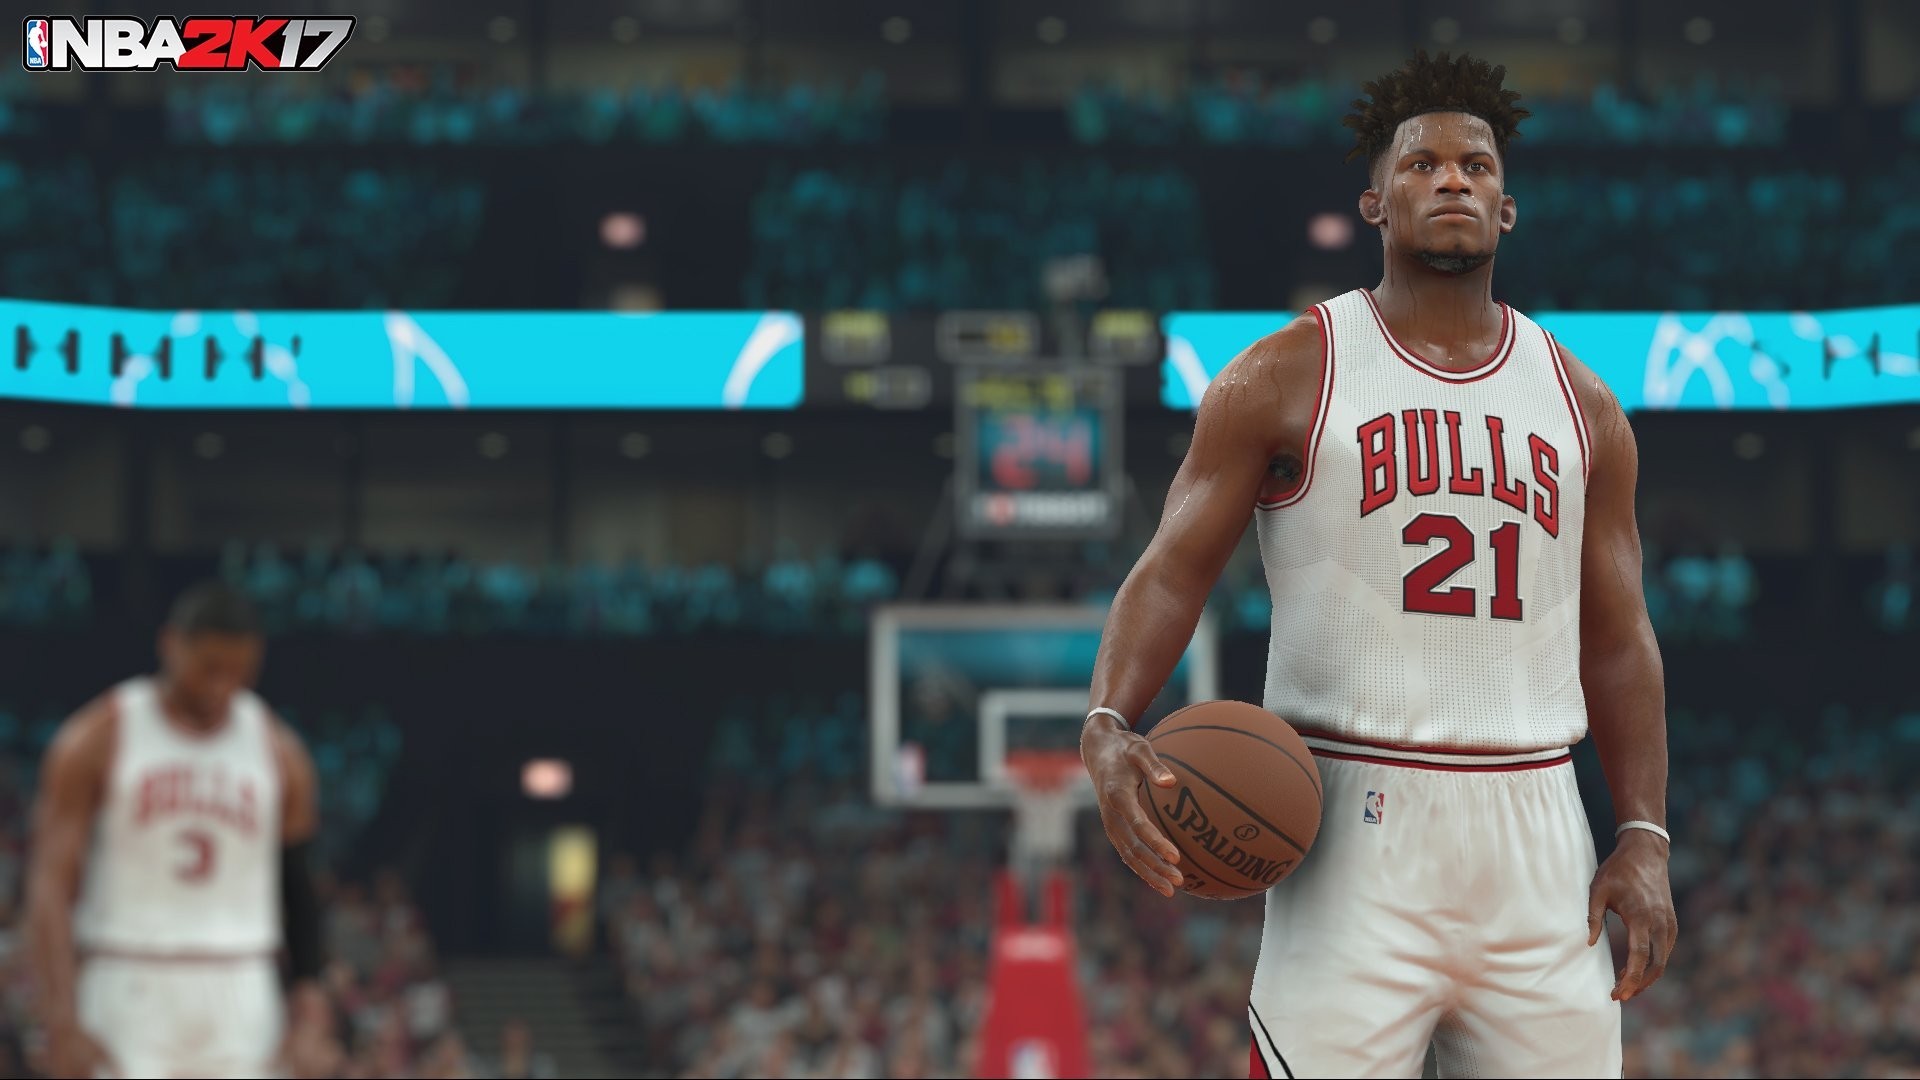 Check out the NBA 2K17 screenshot of Jimmy Butler and post your thoughts.